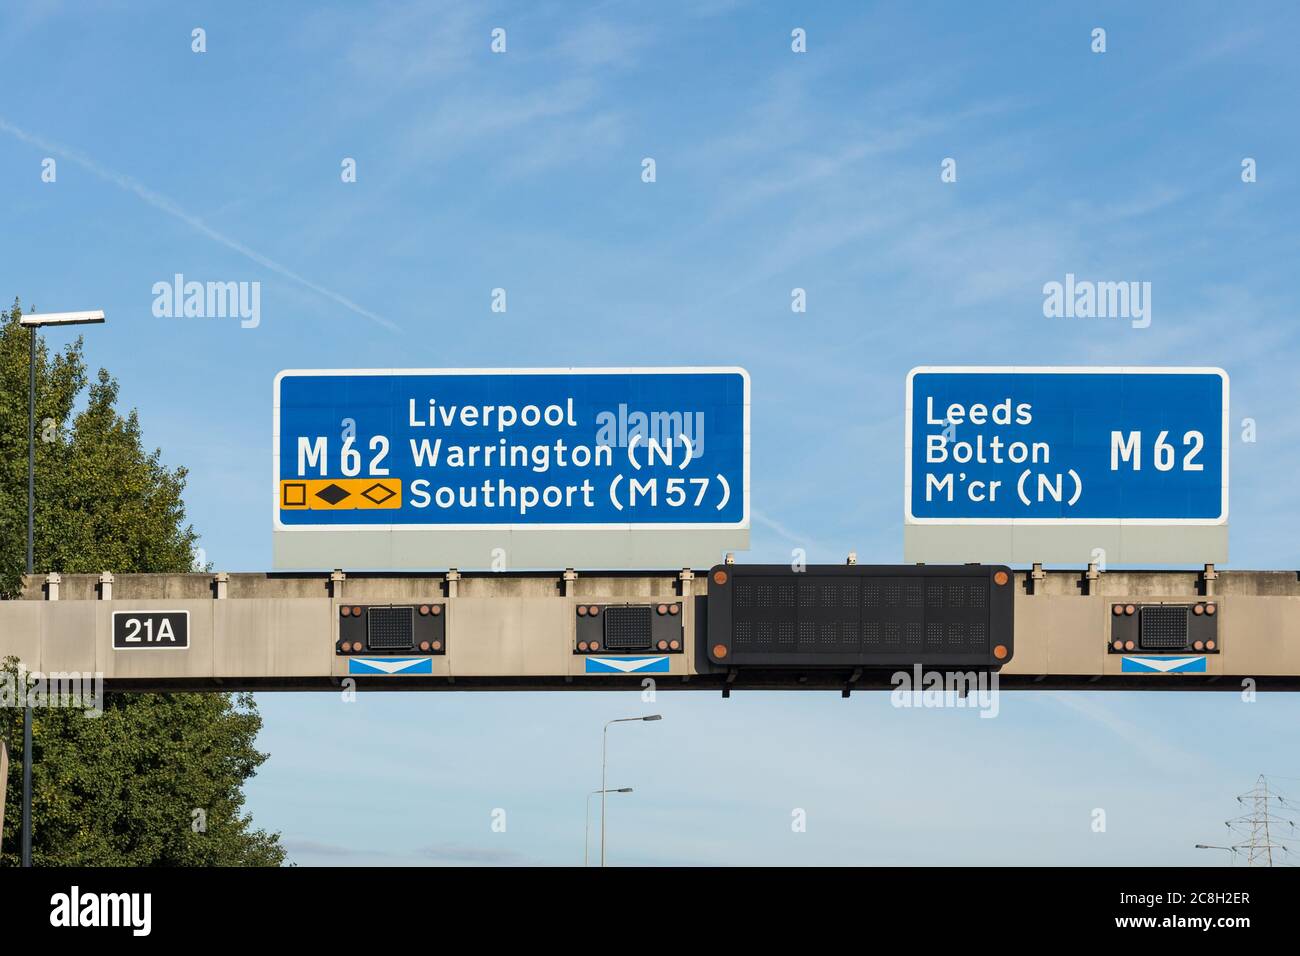 UK motorway sign showing directions to M 62 Liverpool, Warrington, Southport (M57), M 62 Leeds, Bolton, Manchester Stock Photo